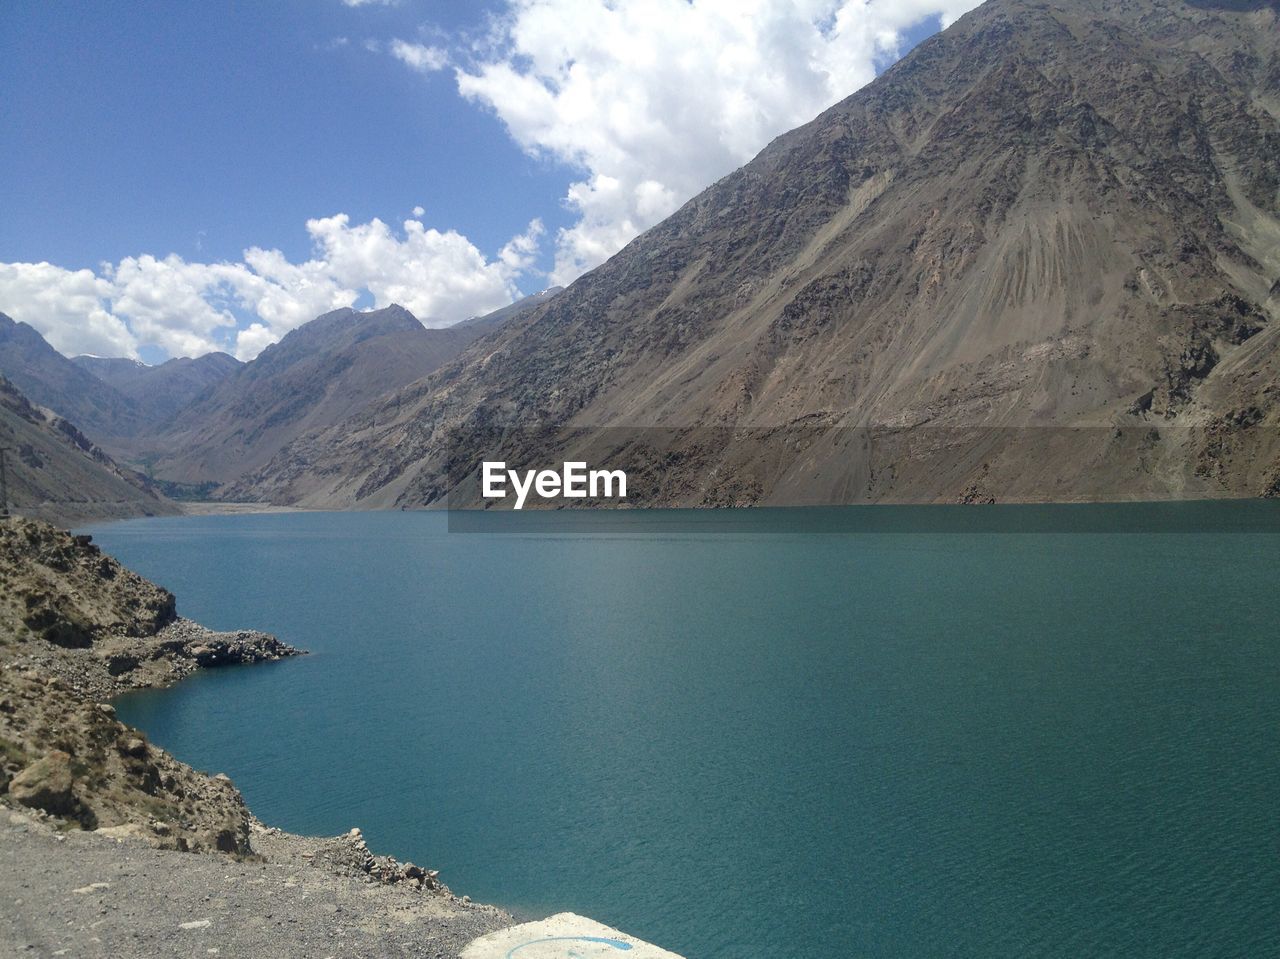 SCENIC VIEW OF LAKE BY MOUNTAIN AGAINST SKY